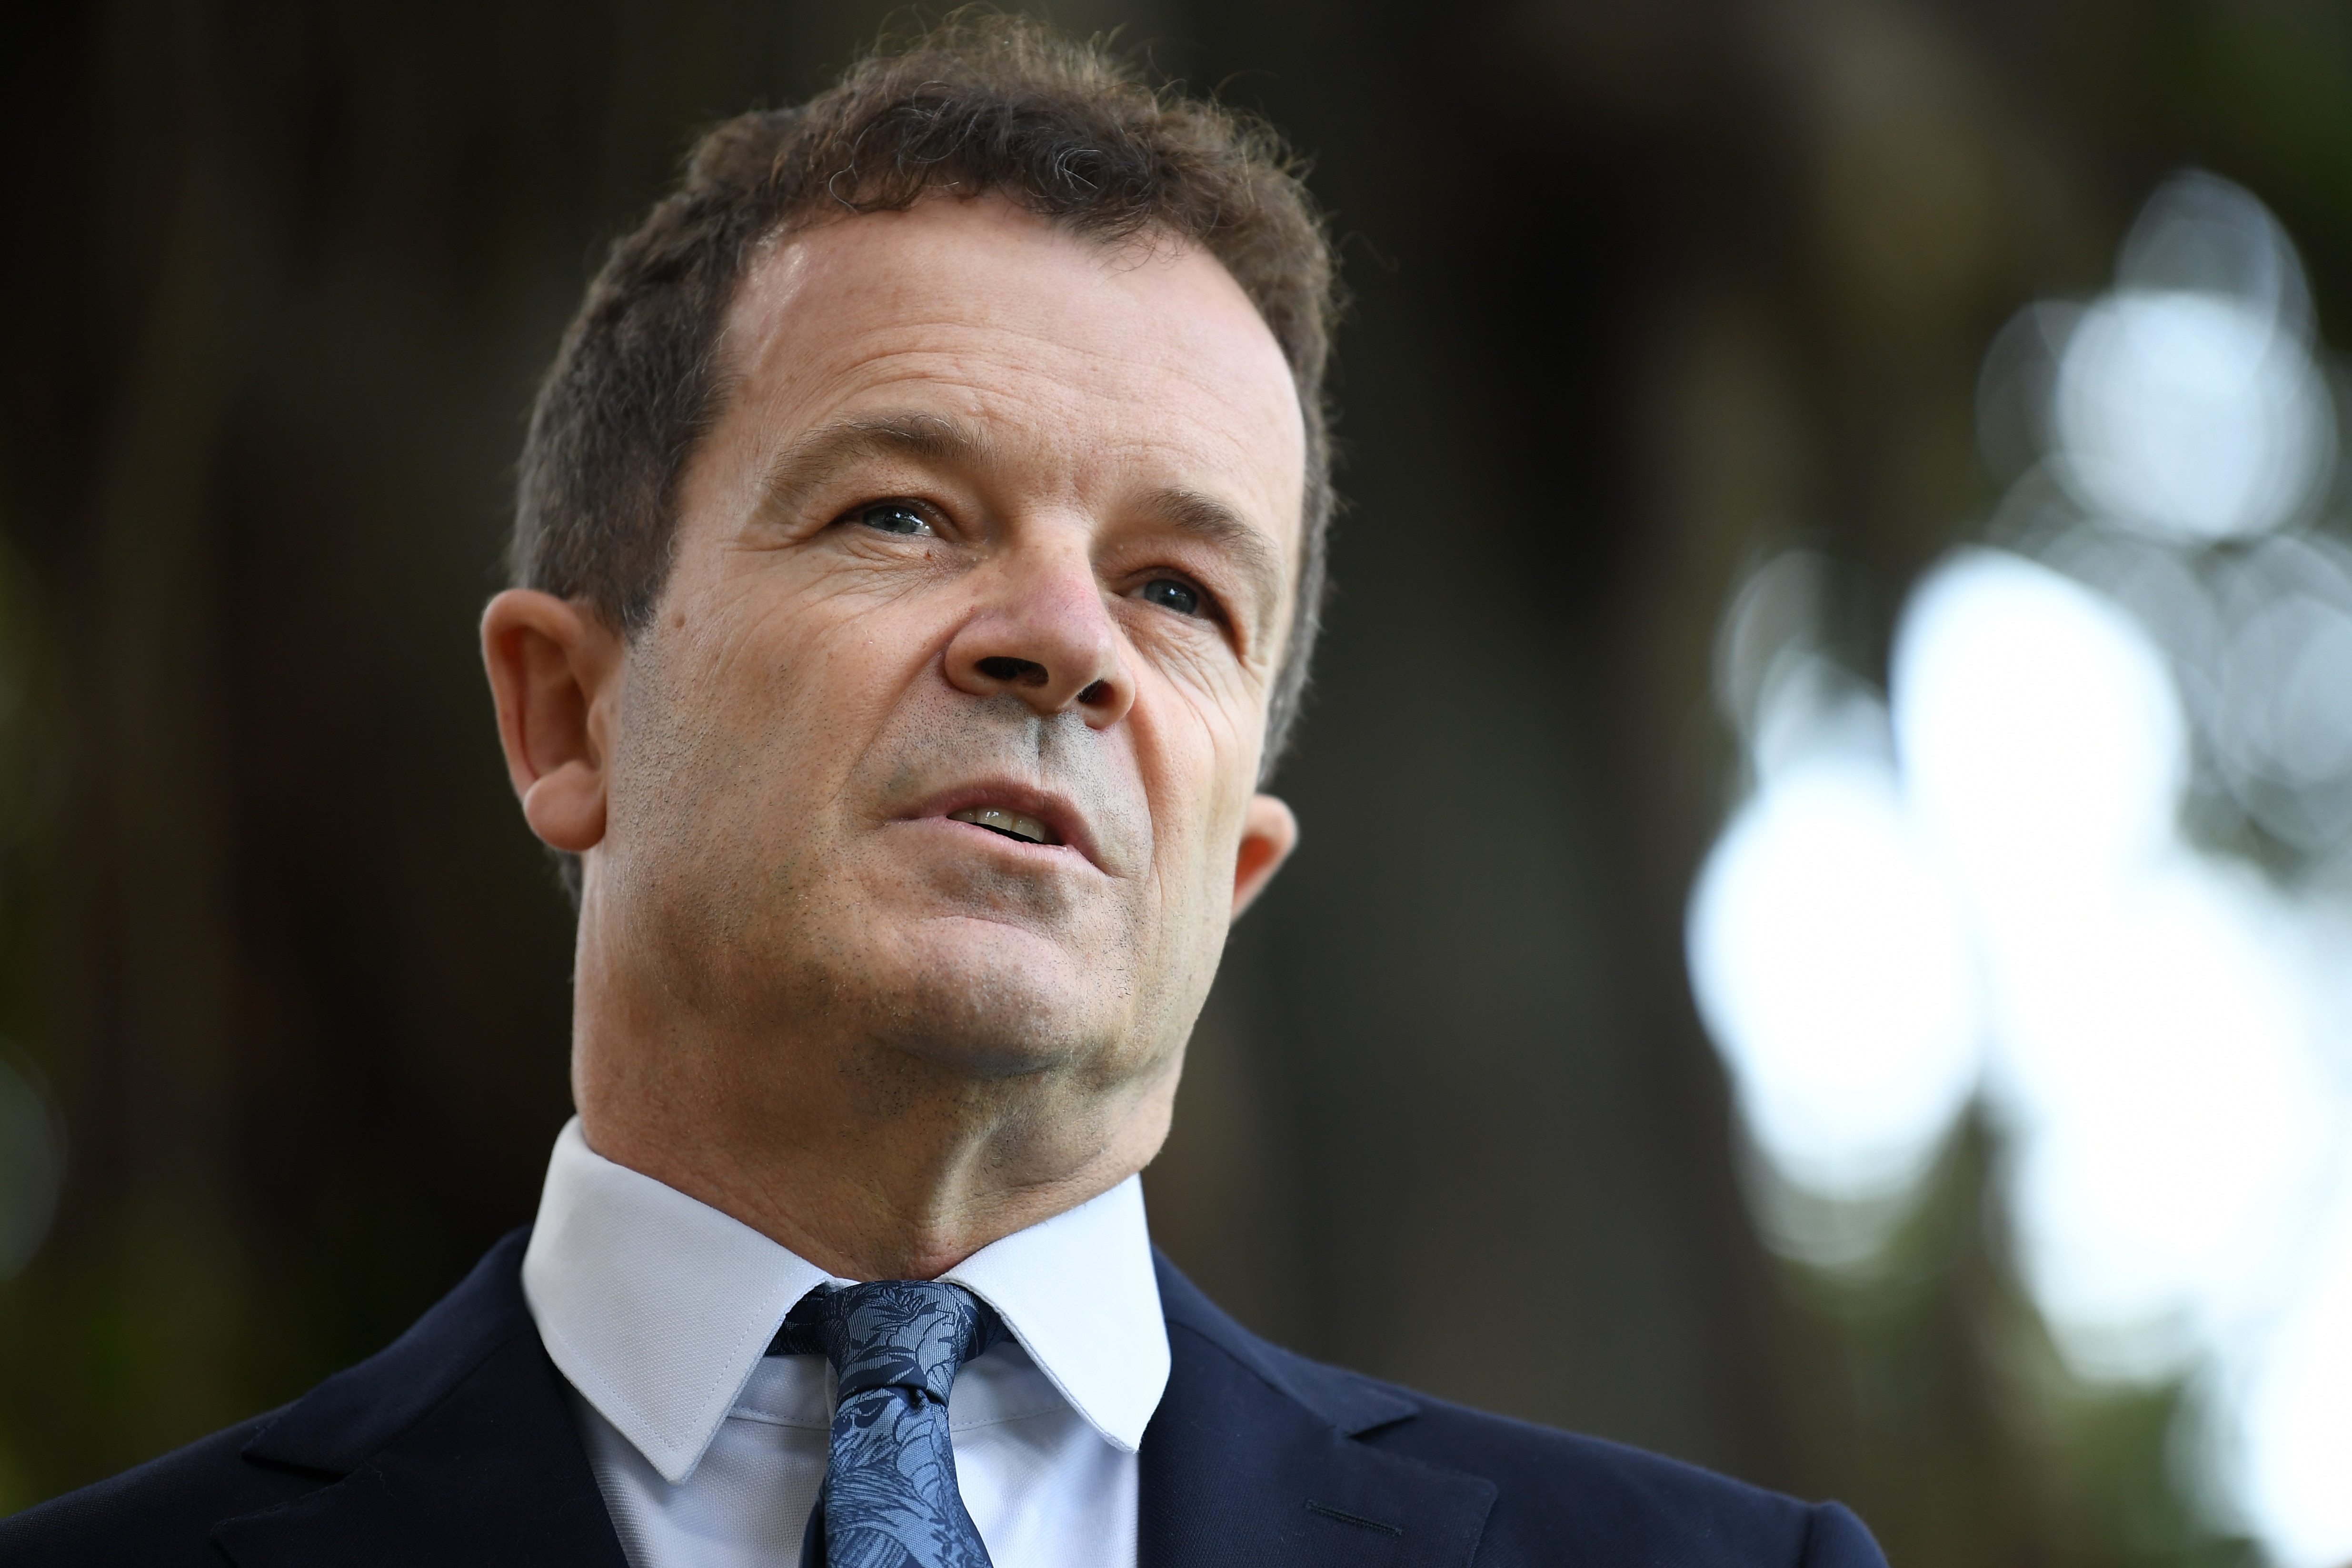 NSW Attorney-General Mark Speakman said a sentencing pilot aims to build up Indigenous community confidence in the justice system.